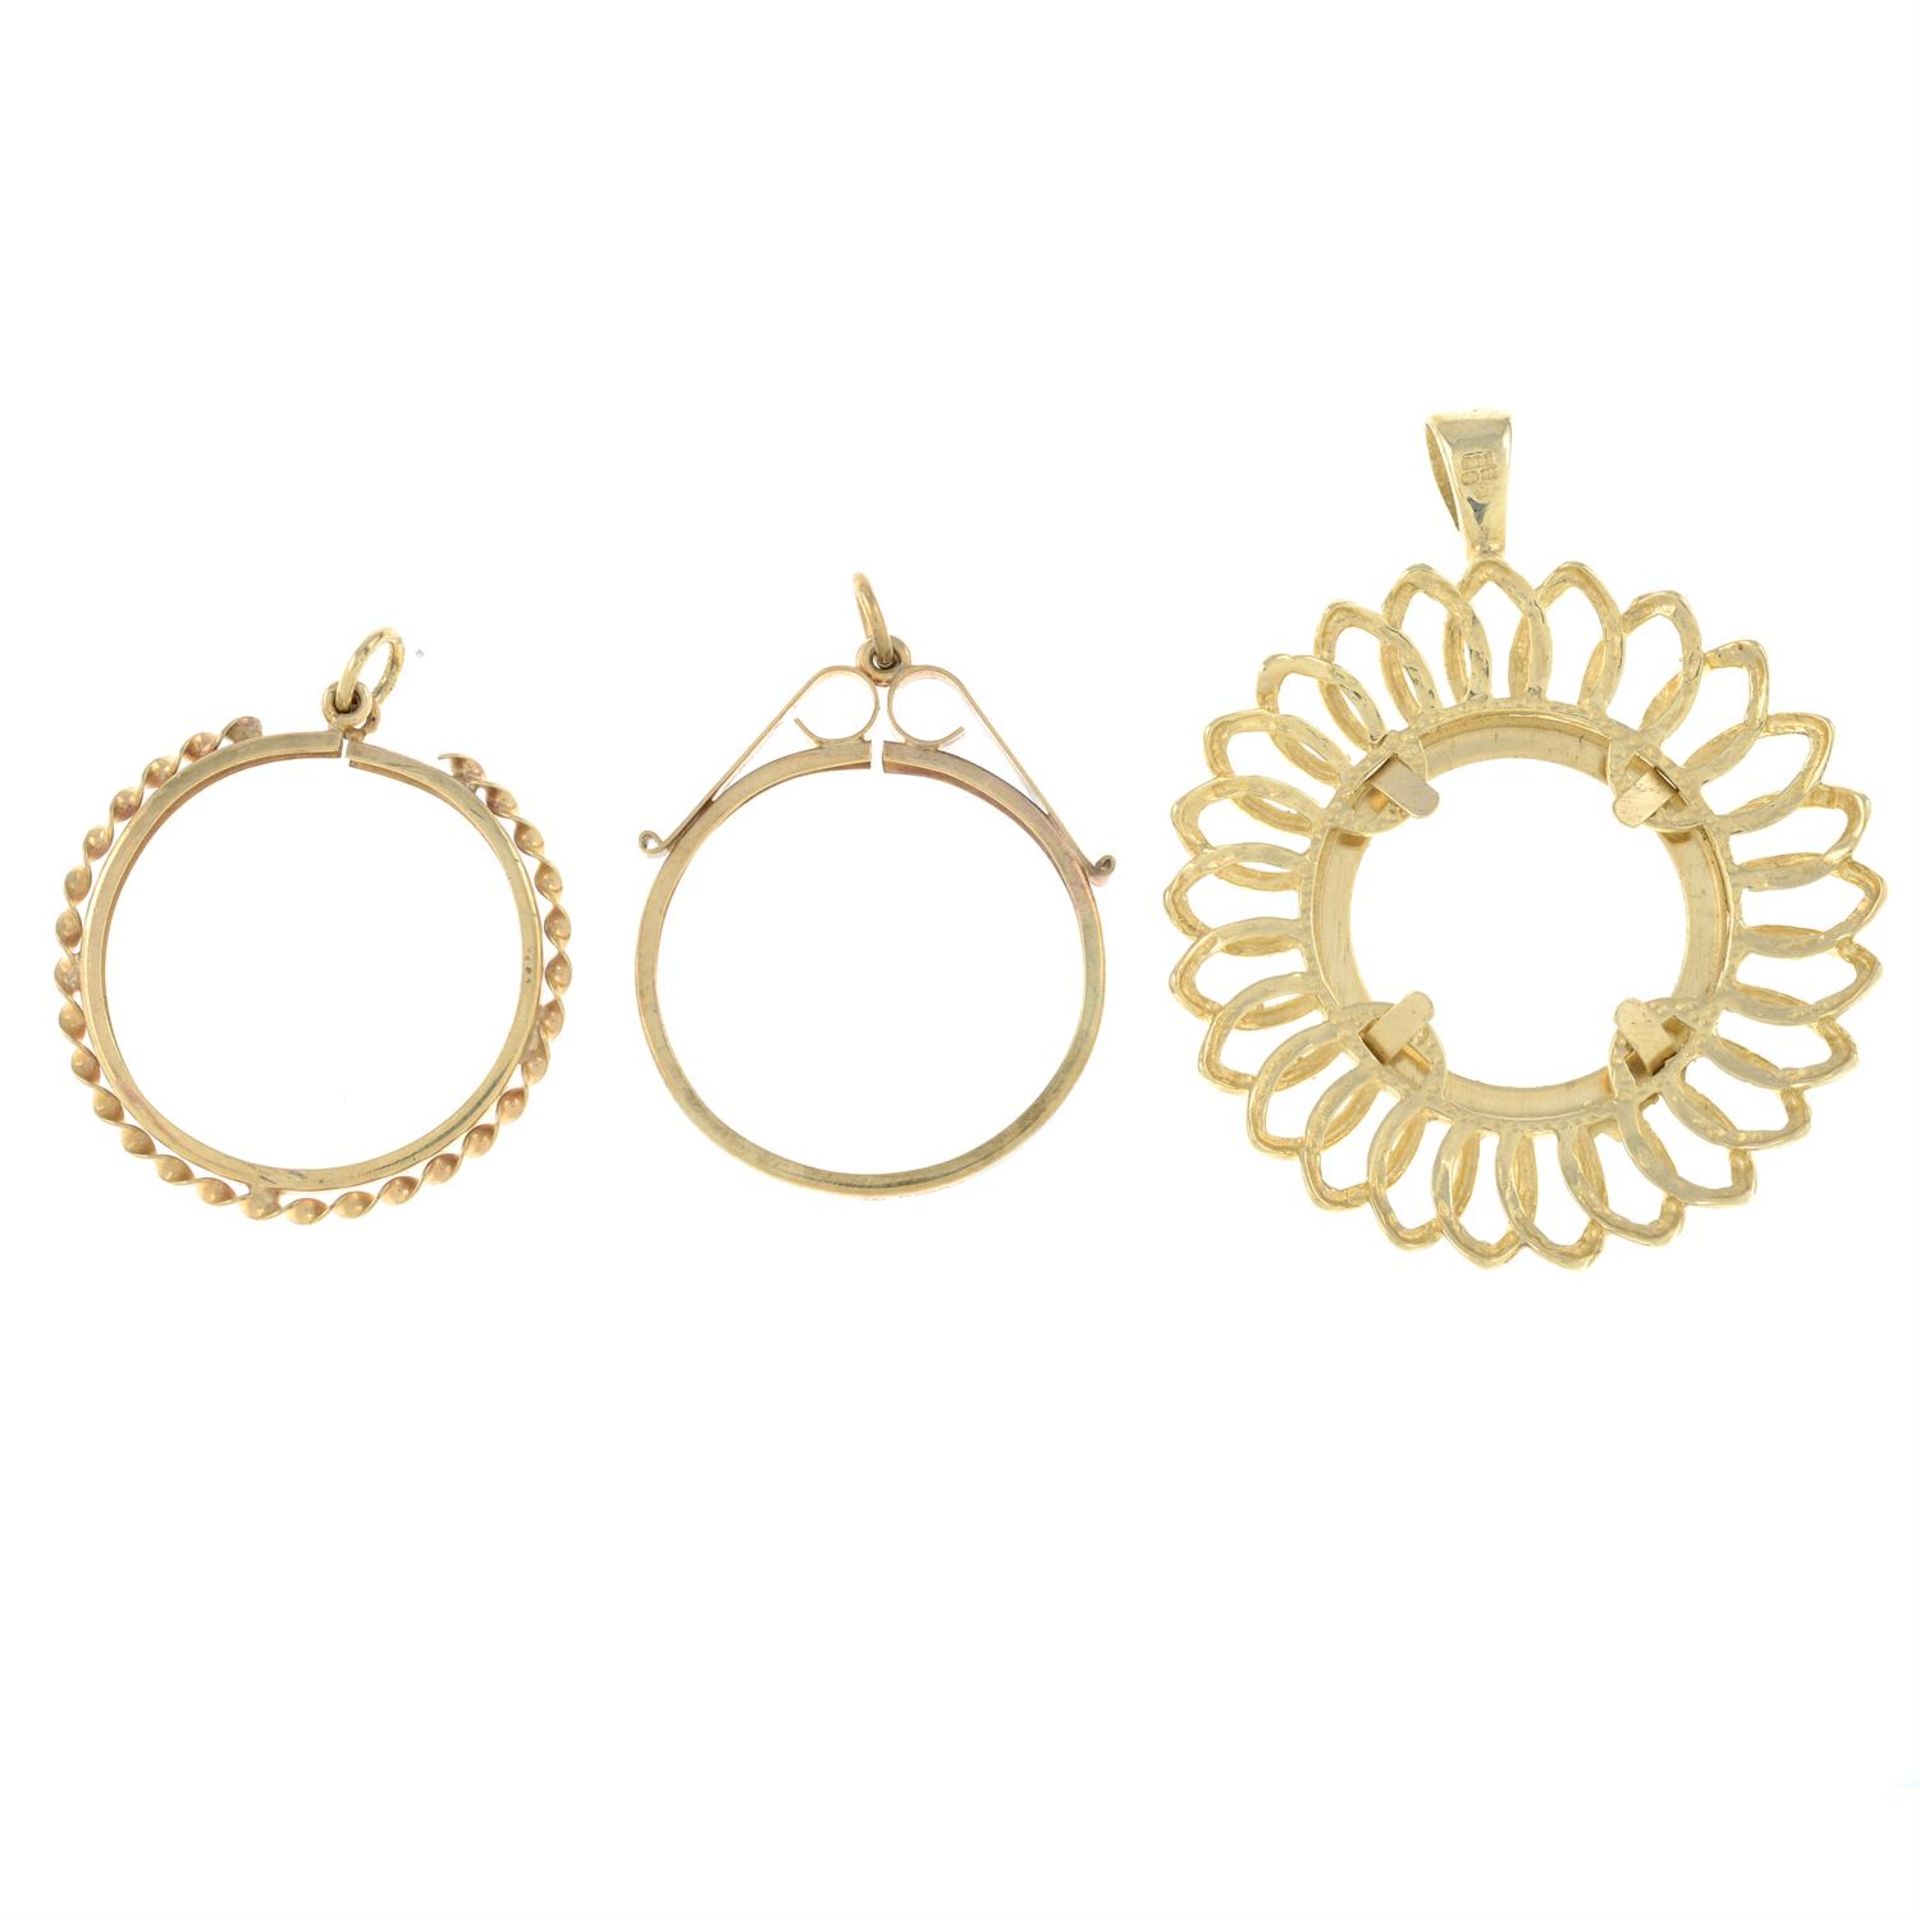 Three 9ct gold sovereign pendant mounts. - Image 2 of 2